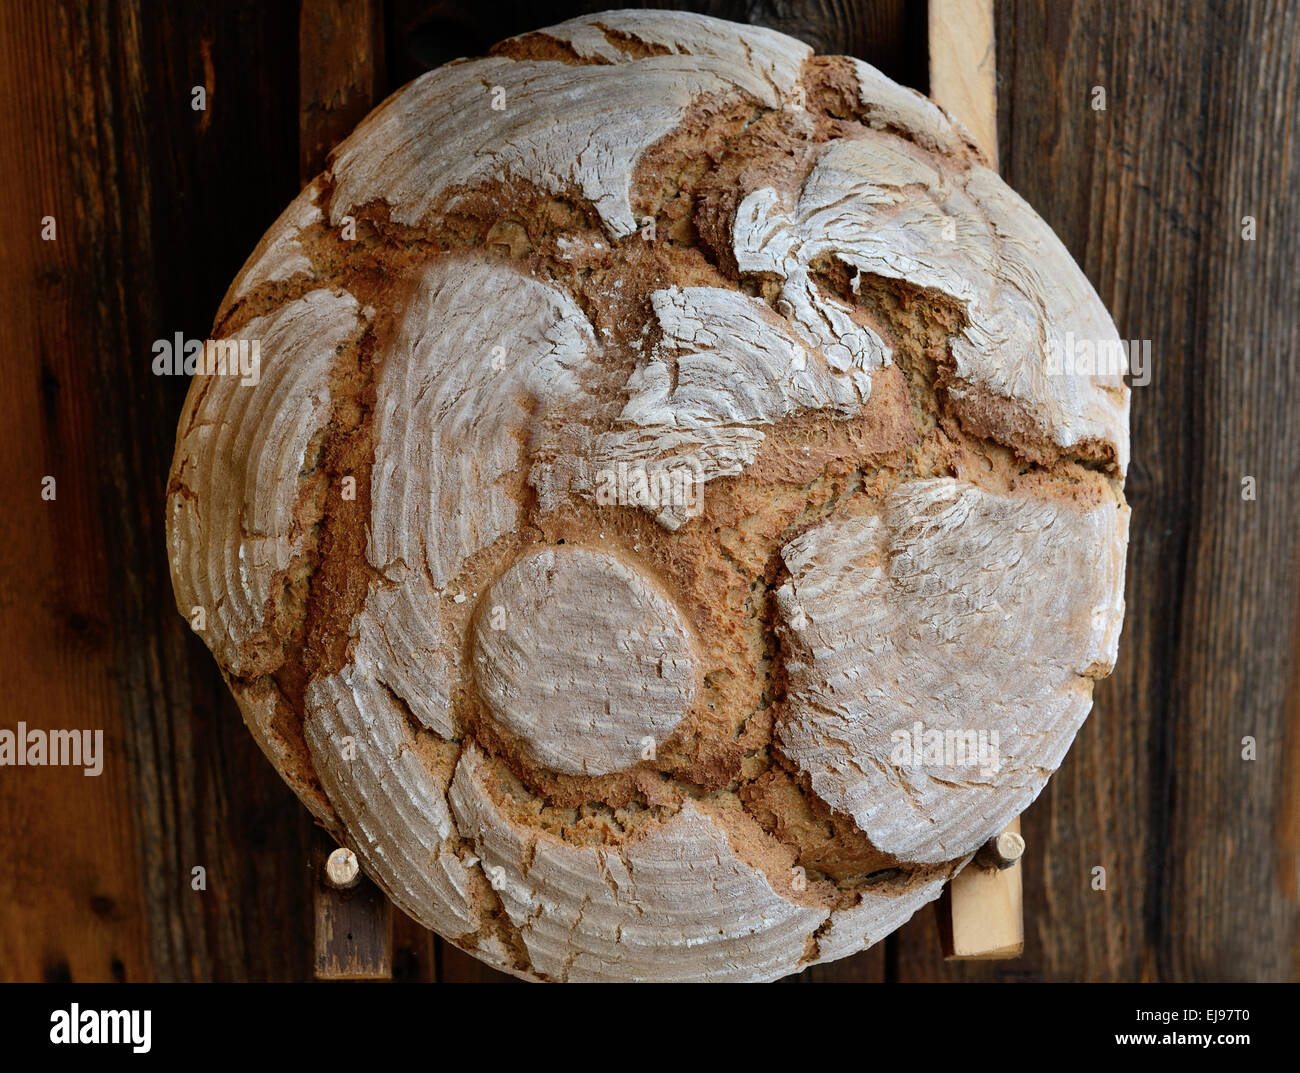 Baked loaf of bread Stock Photo